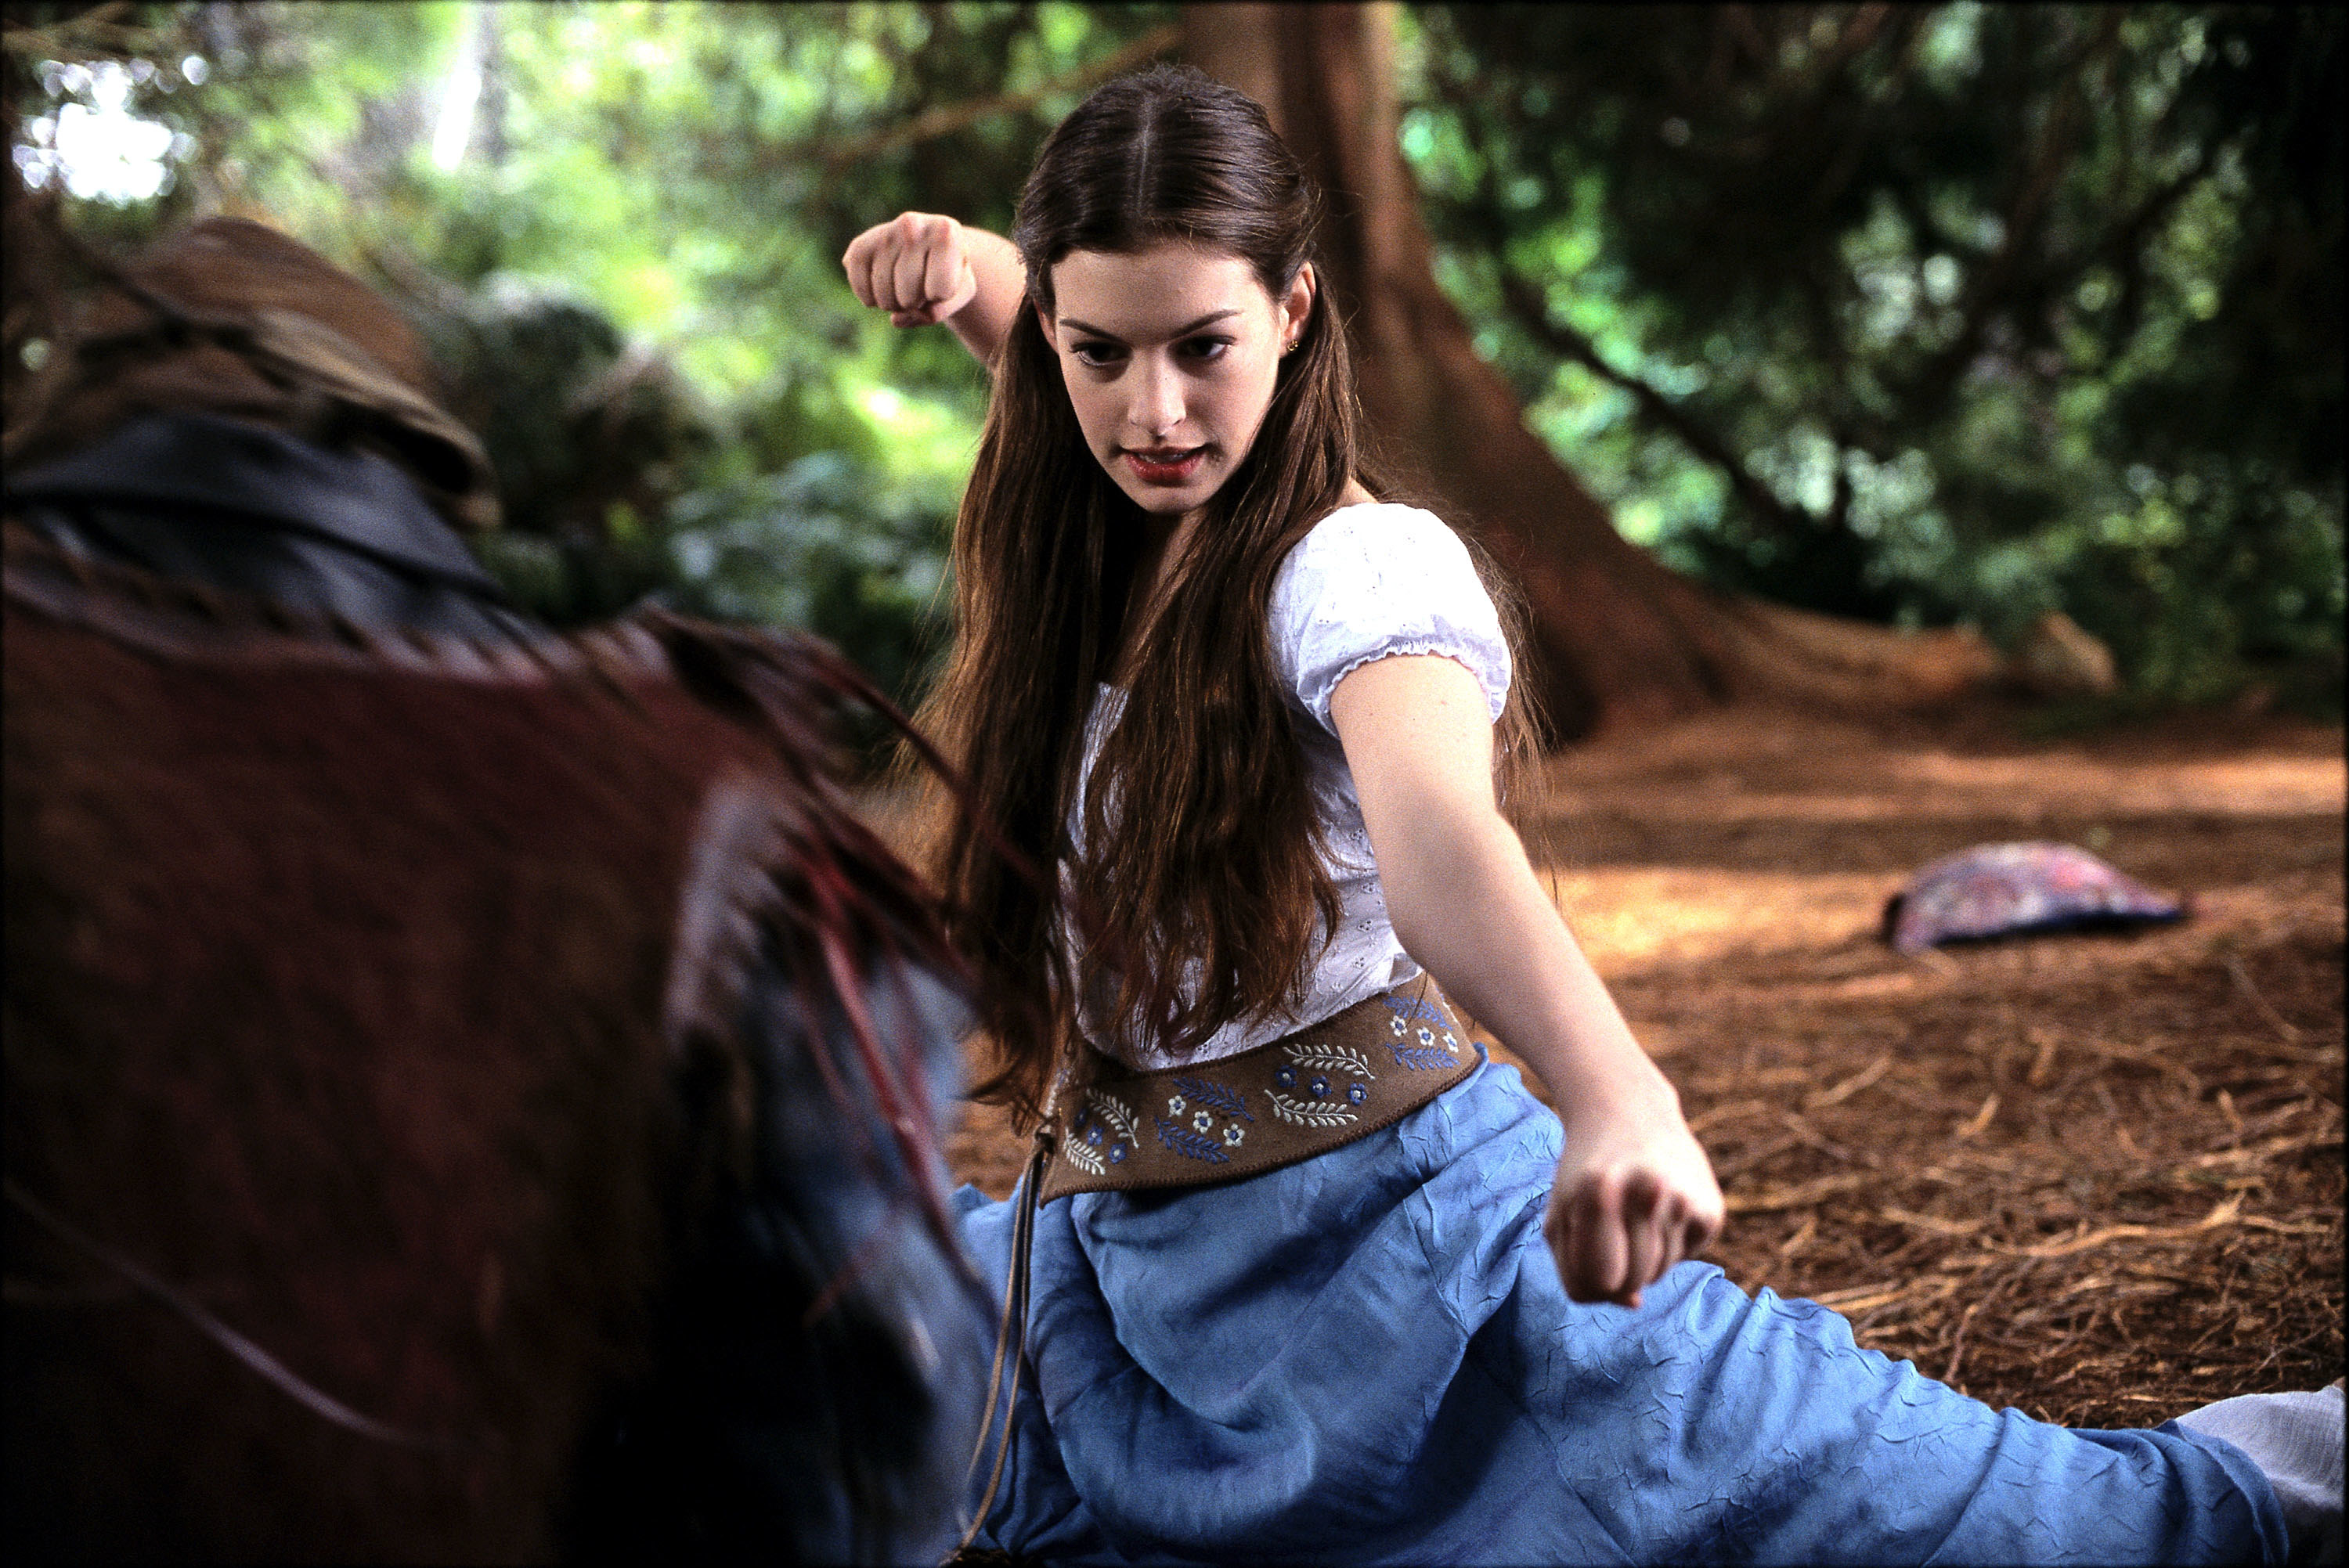 Anne Hathaway as a princess in fighting stance